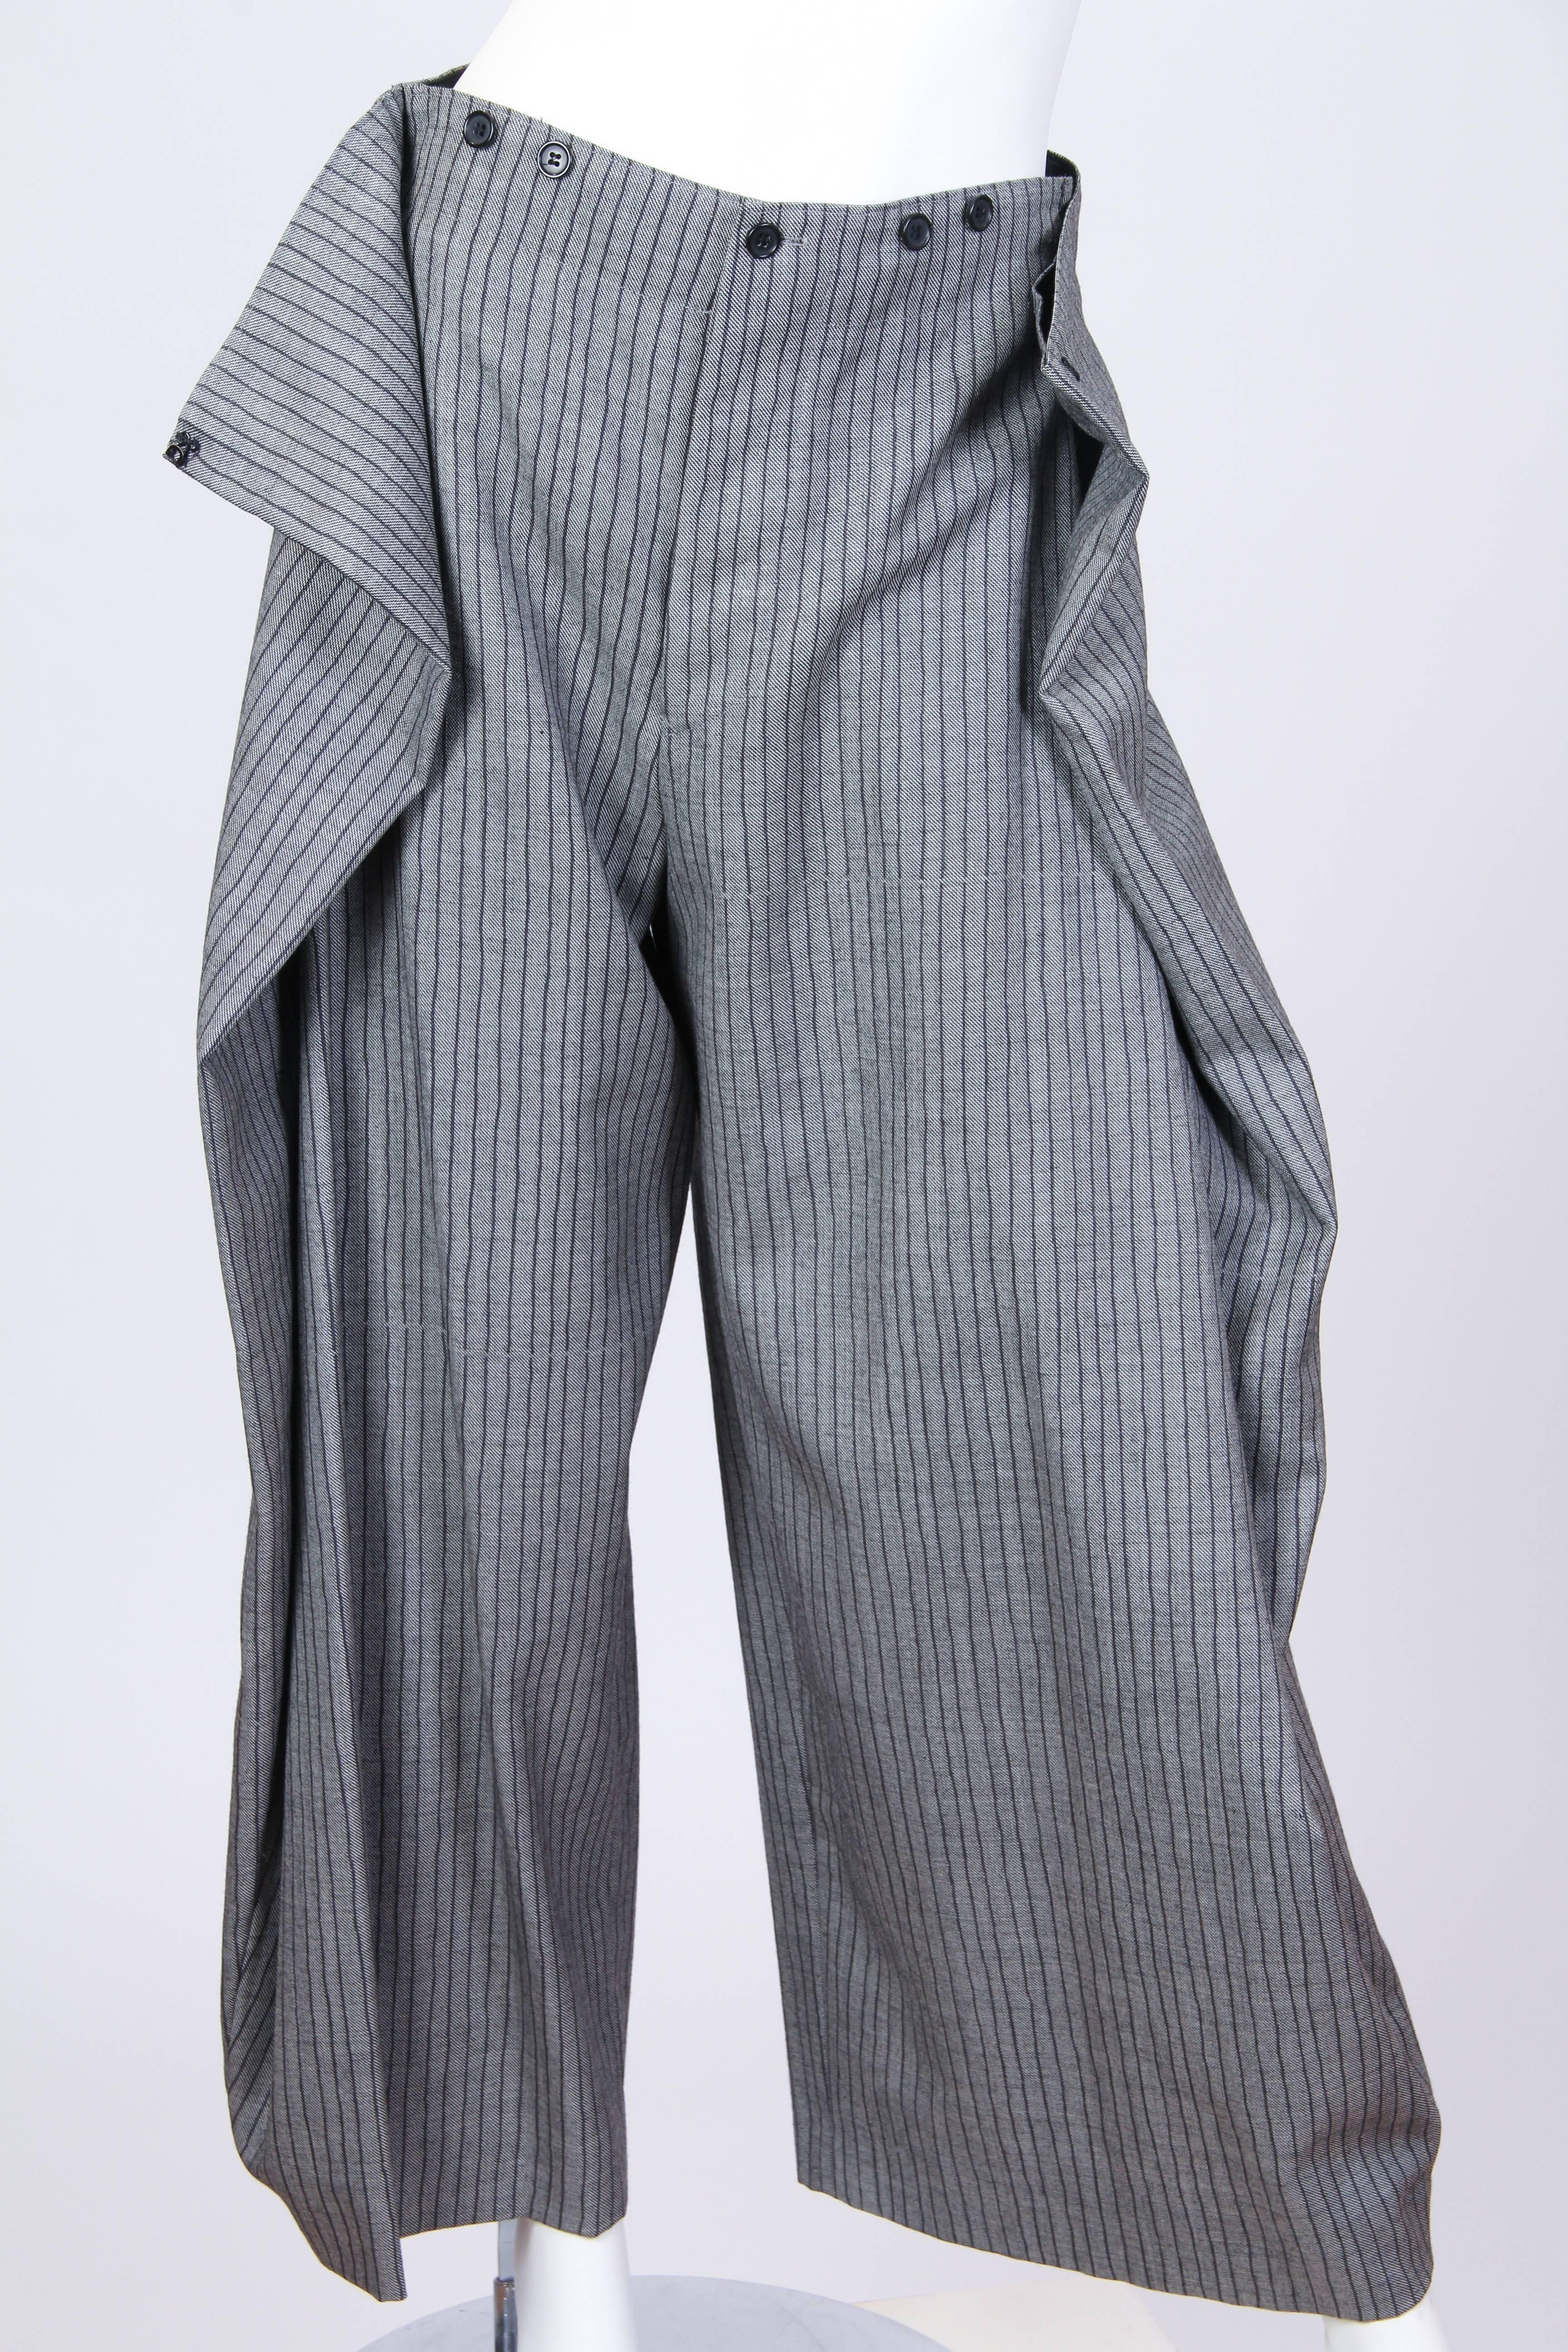 Ingeniously pleated and folded trousers from Jean Paul Gaultier. Victorian styling with the belt back and suspender buttons. 